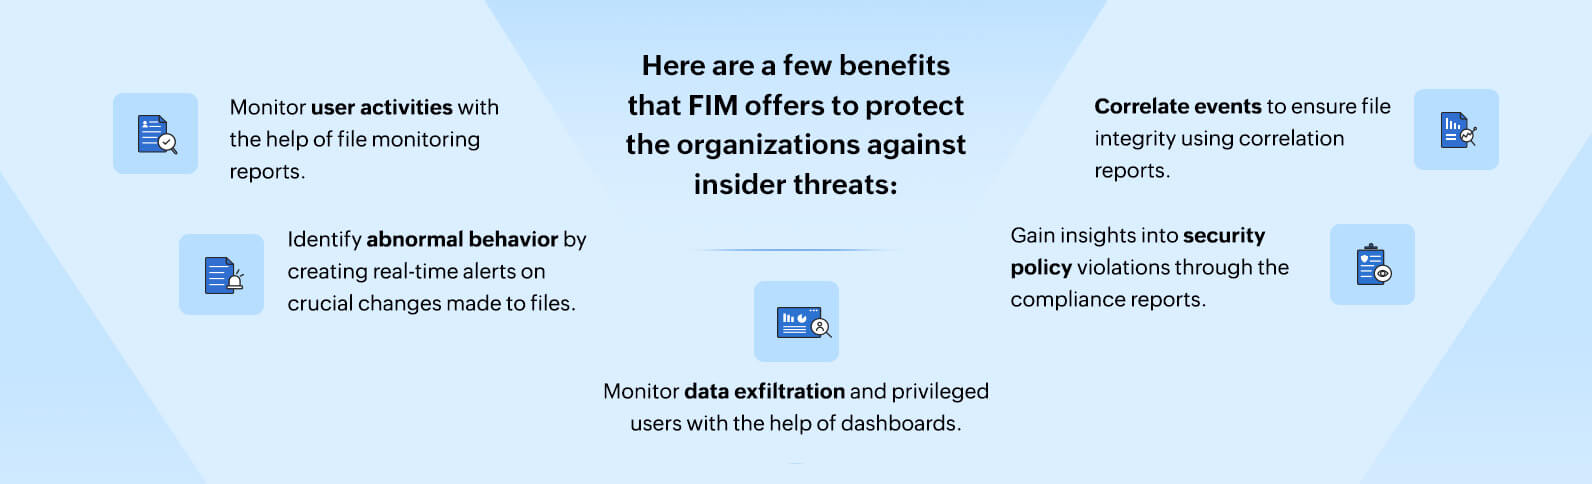 FIM features to prevent insider threats